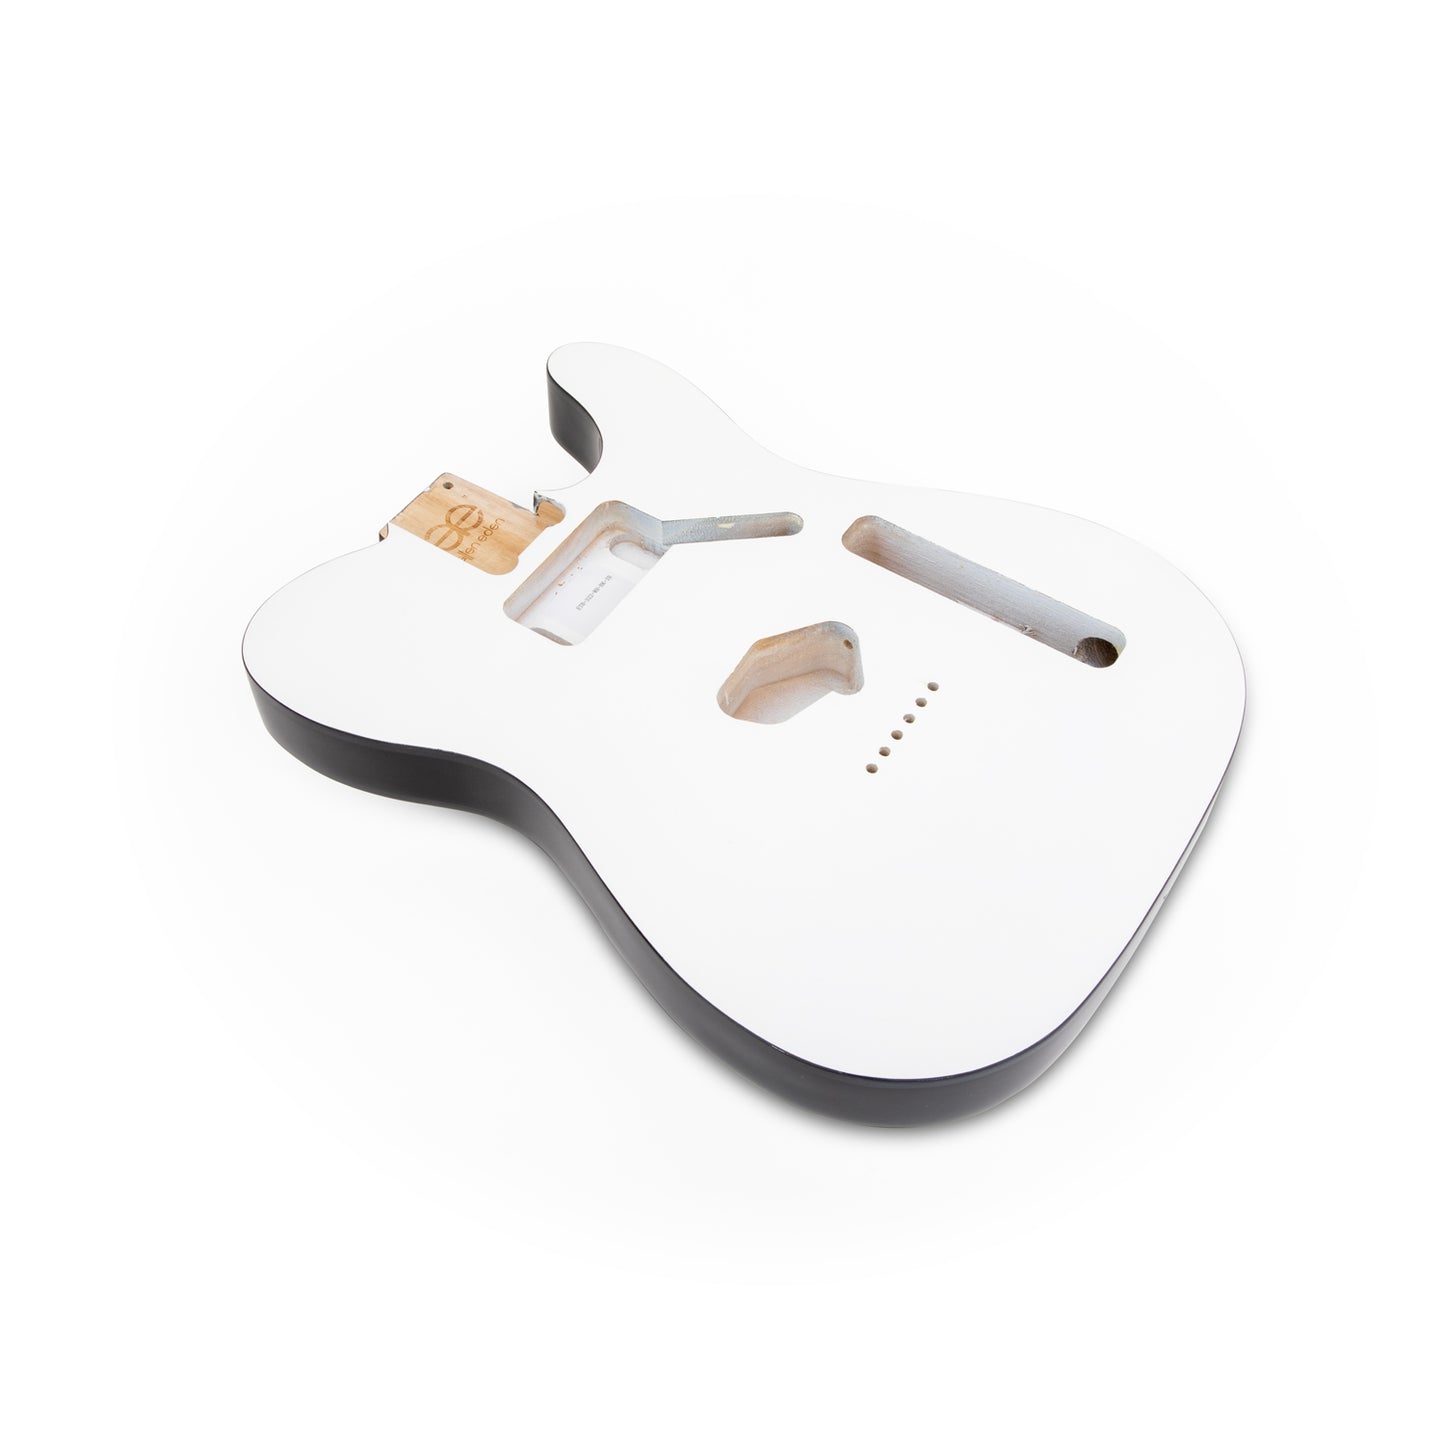 AE Guitars® T-Style Paulownia Guitar Body White and Black Sides